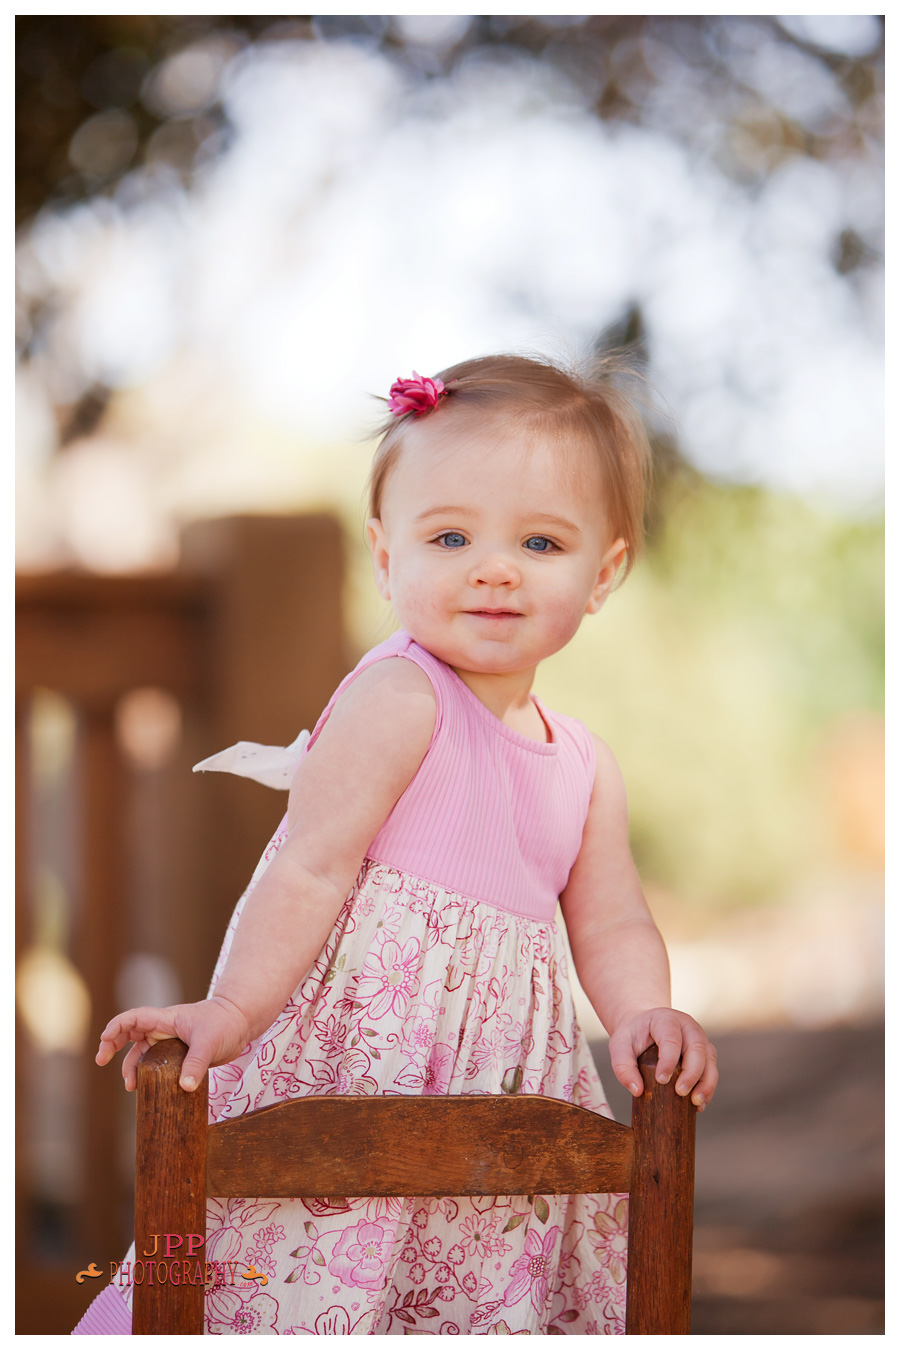 Portrait session for 1 year old   